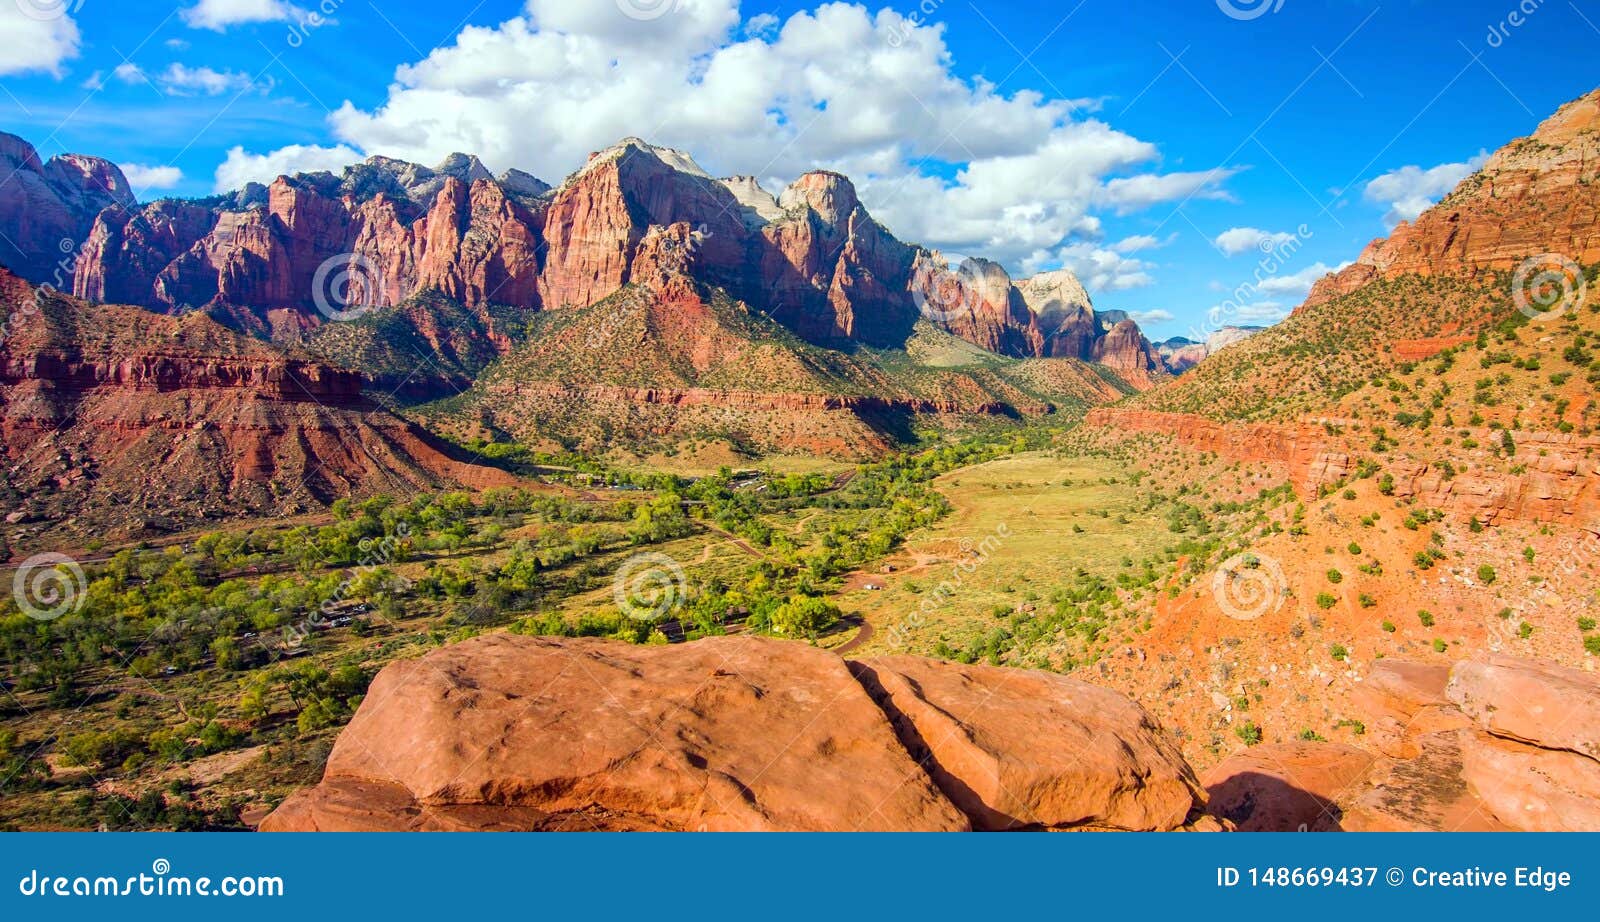 Amazing View Of Watchman Trail Zion National Park Utah Stock Image